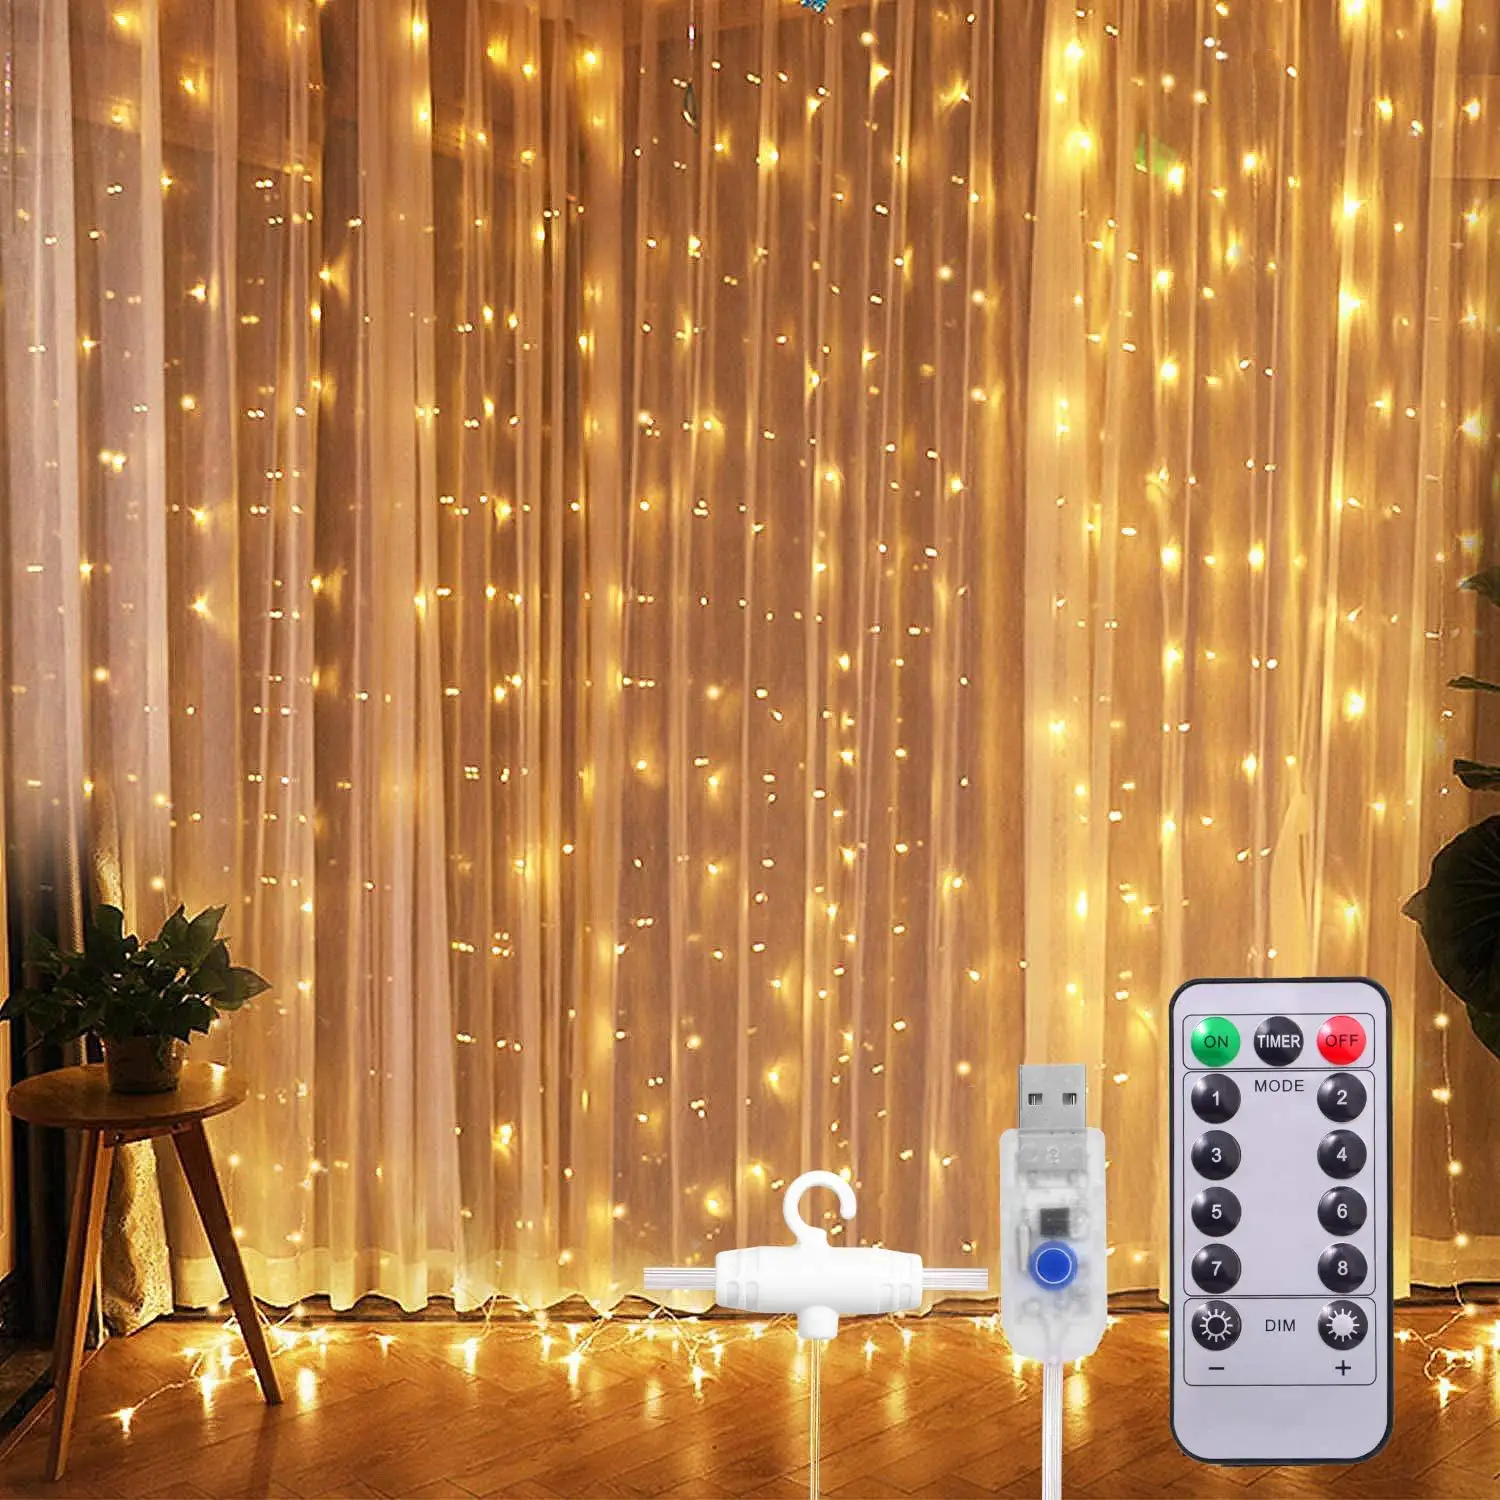 Christmas decoration 3m LED Curtain String Light Fairy Garland for Home Kid Bedroom Party Holiday Lighting